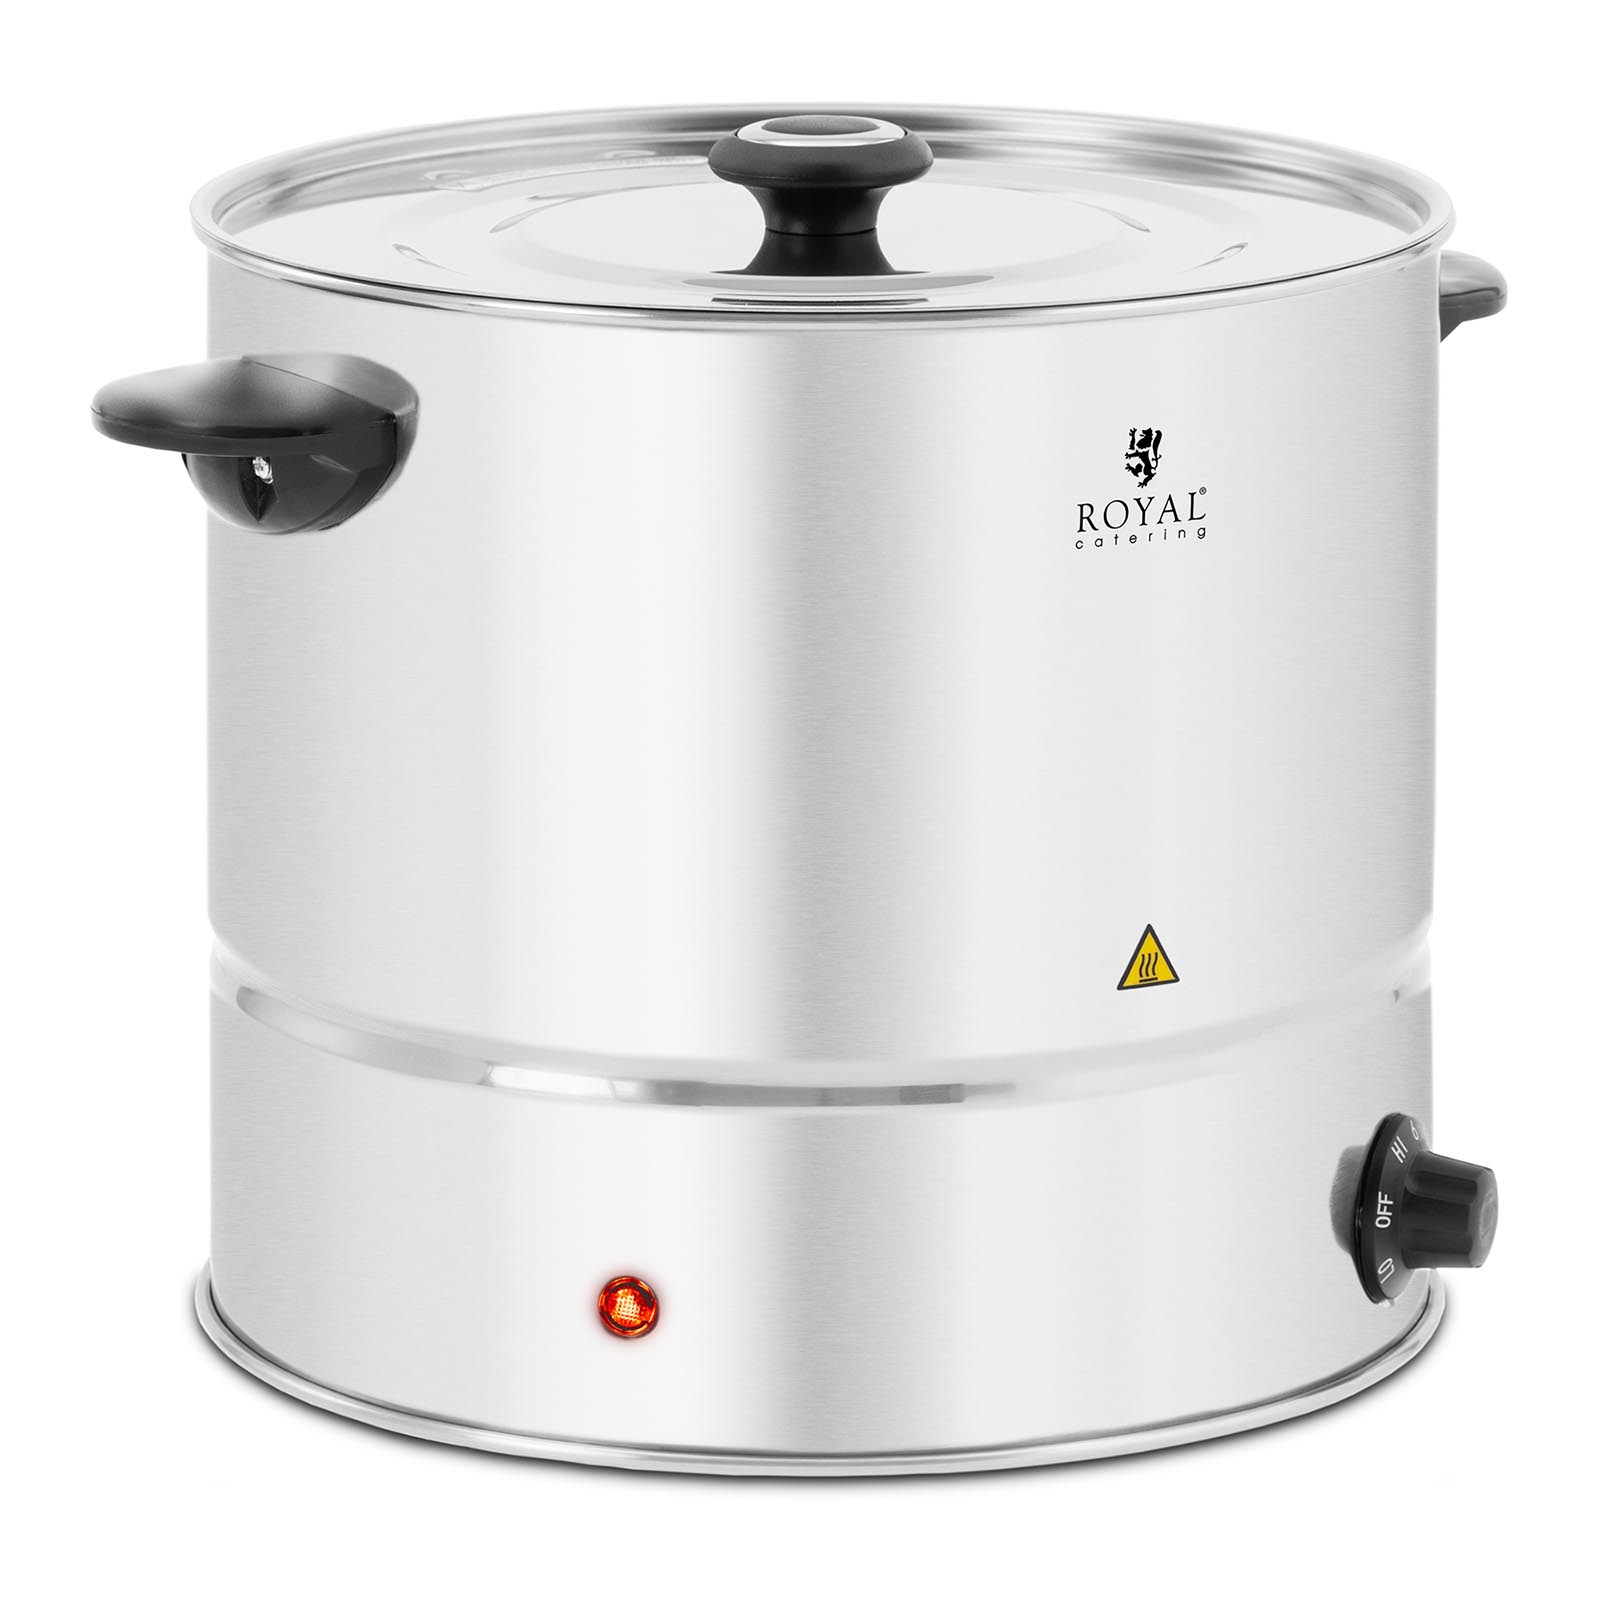 Stoomkoker - 13 L - 1000 W - Royal Catering